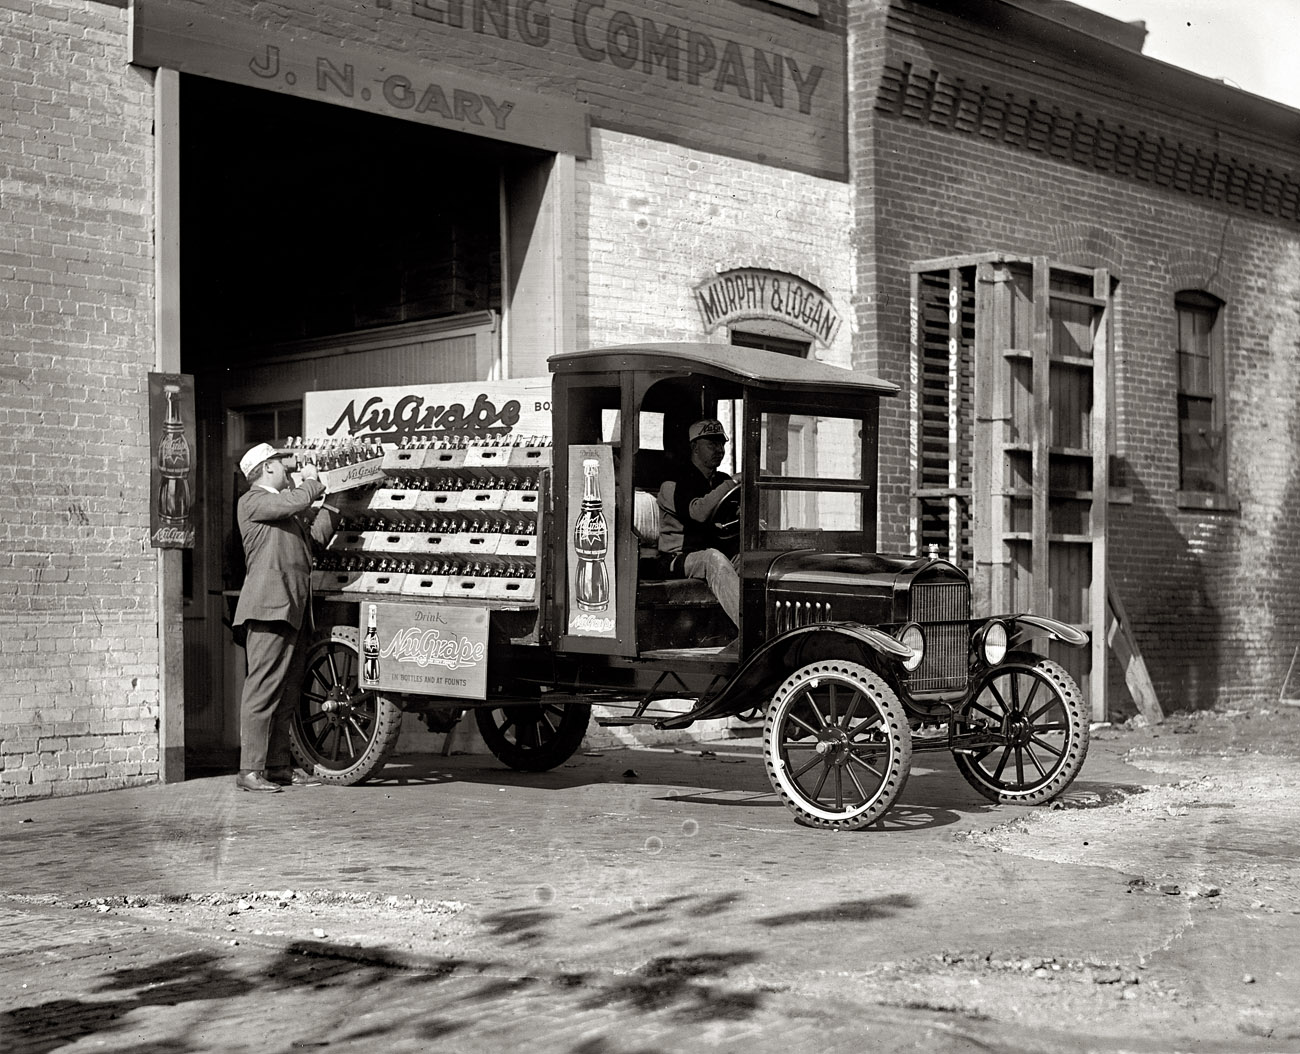 1924. Washington, D.C. "Ford Motor Co. NuGrape delivery truck." Note the perforated solid rubber tires. View full size. National Photo Co. Collection.